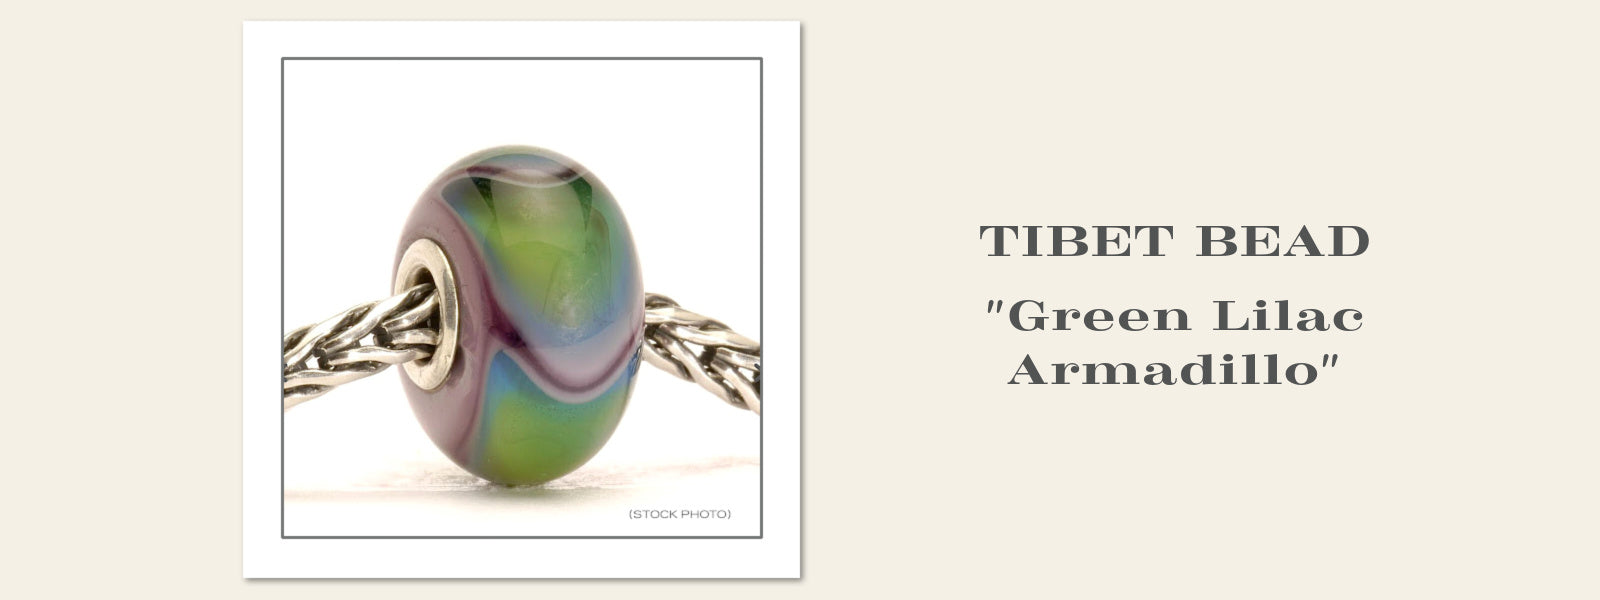 GREEN LILAC ARMADILLO is part of the rare Trollbeads Tibet Collection which is available at Suzie Q Studio.